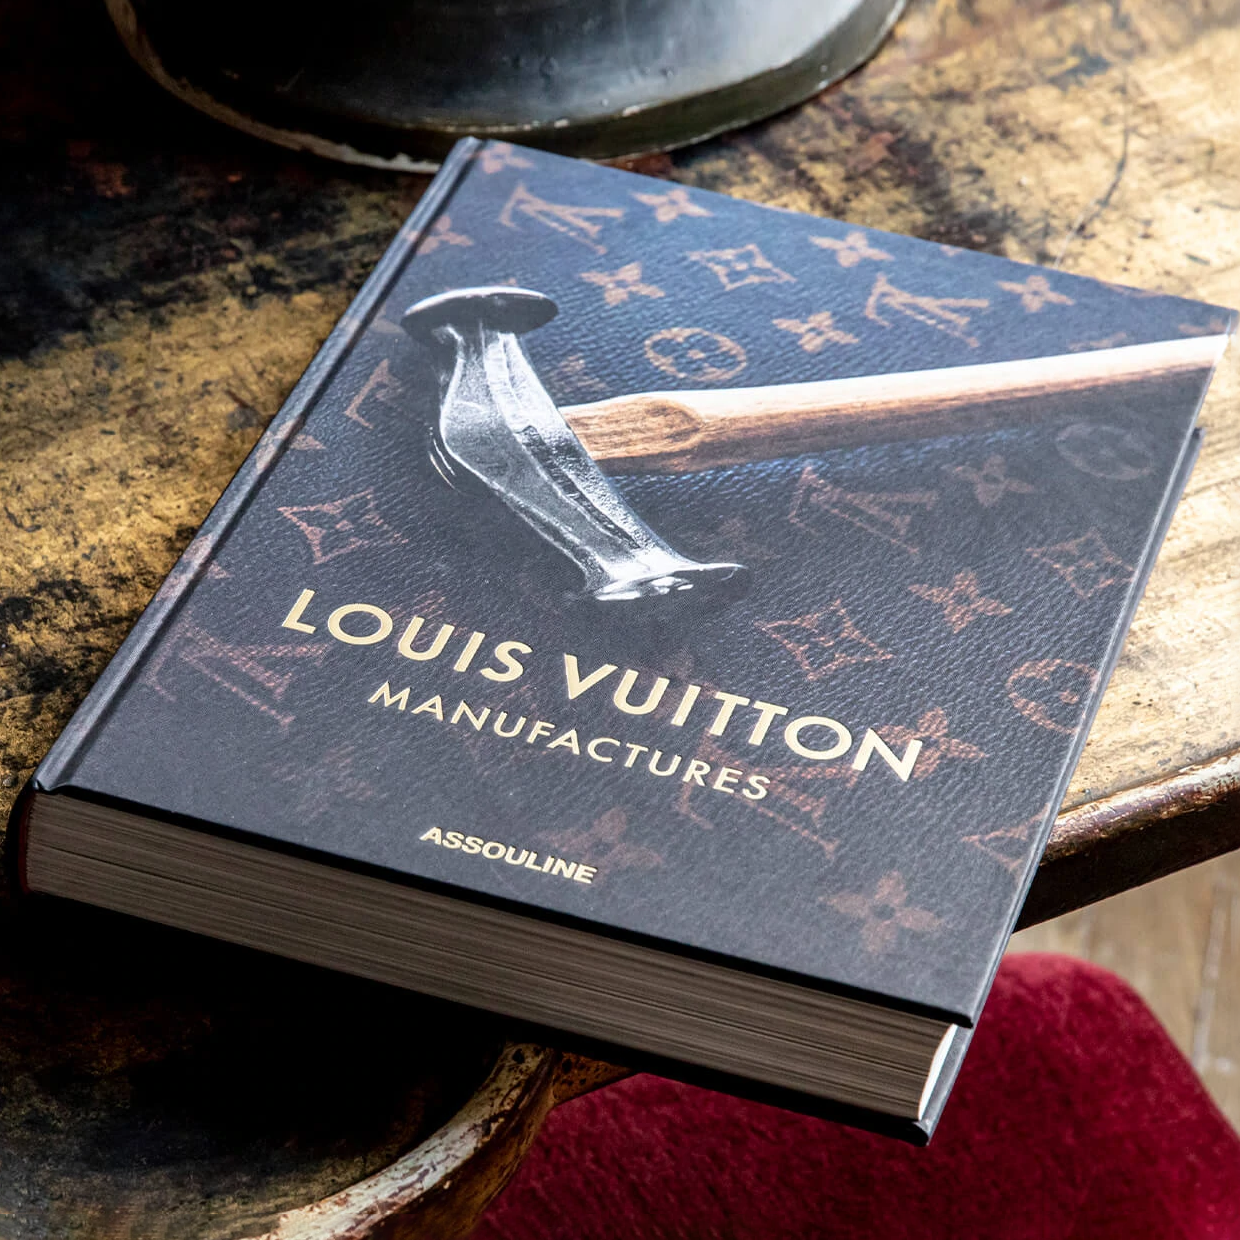 Louis Vuitton: The Birth of Modern Luxury Hardcover Book